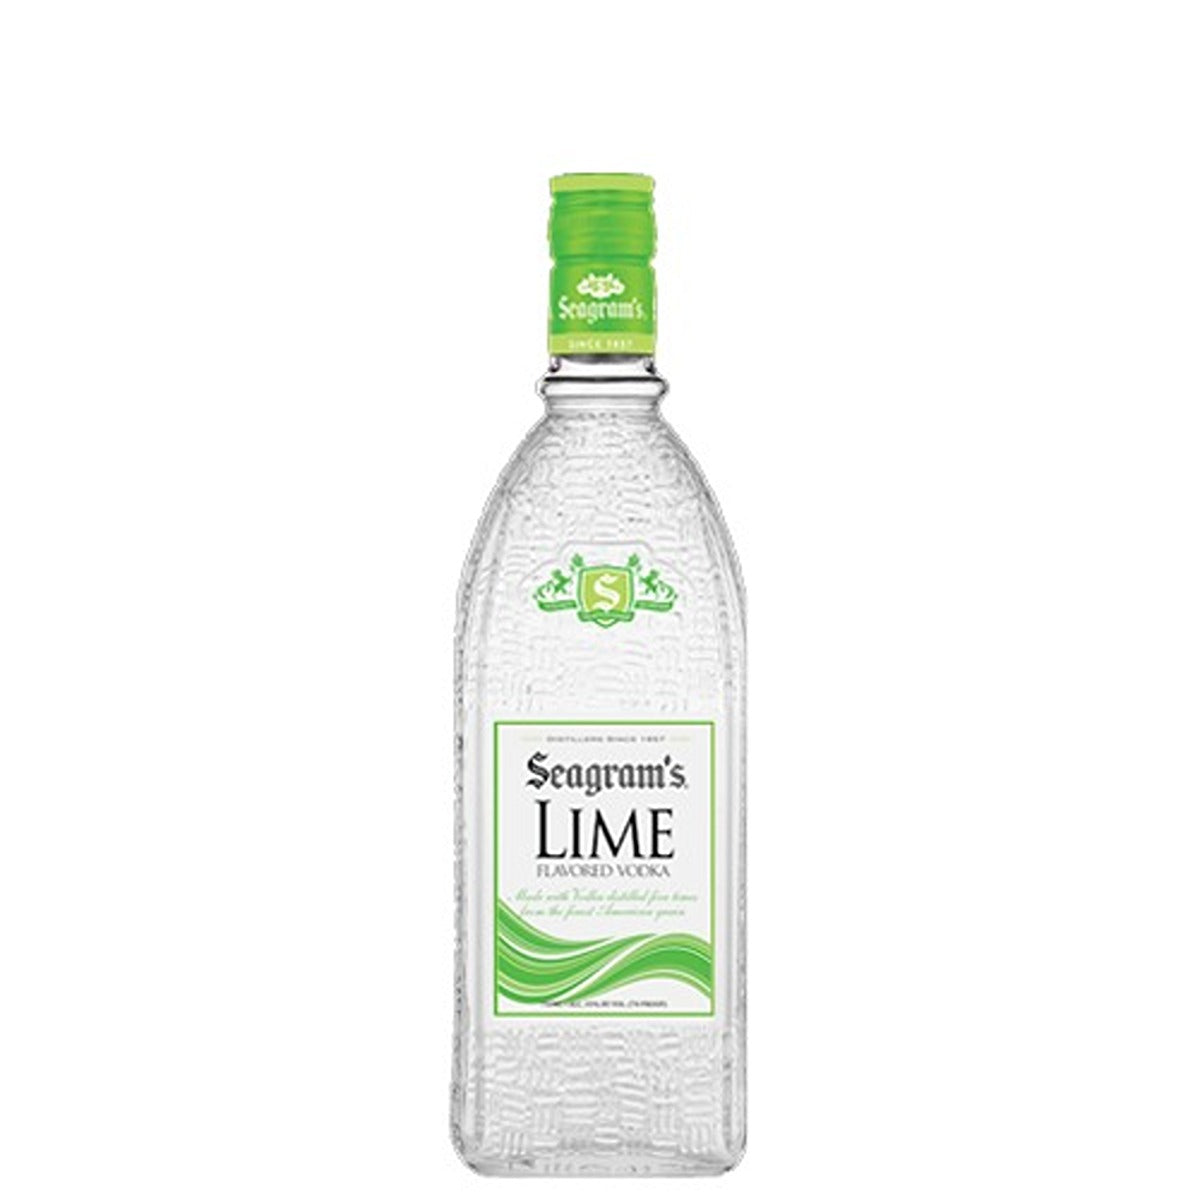 SEAGRAMS LIME 750